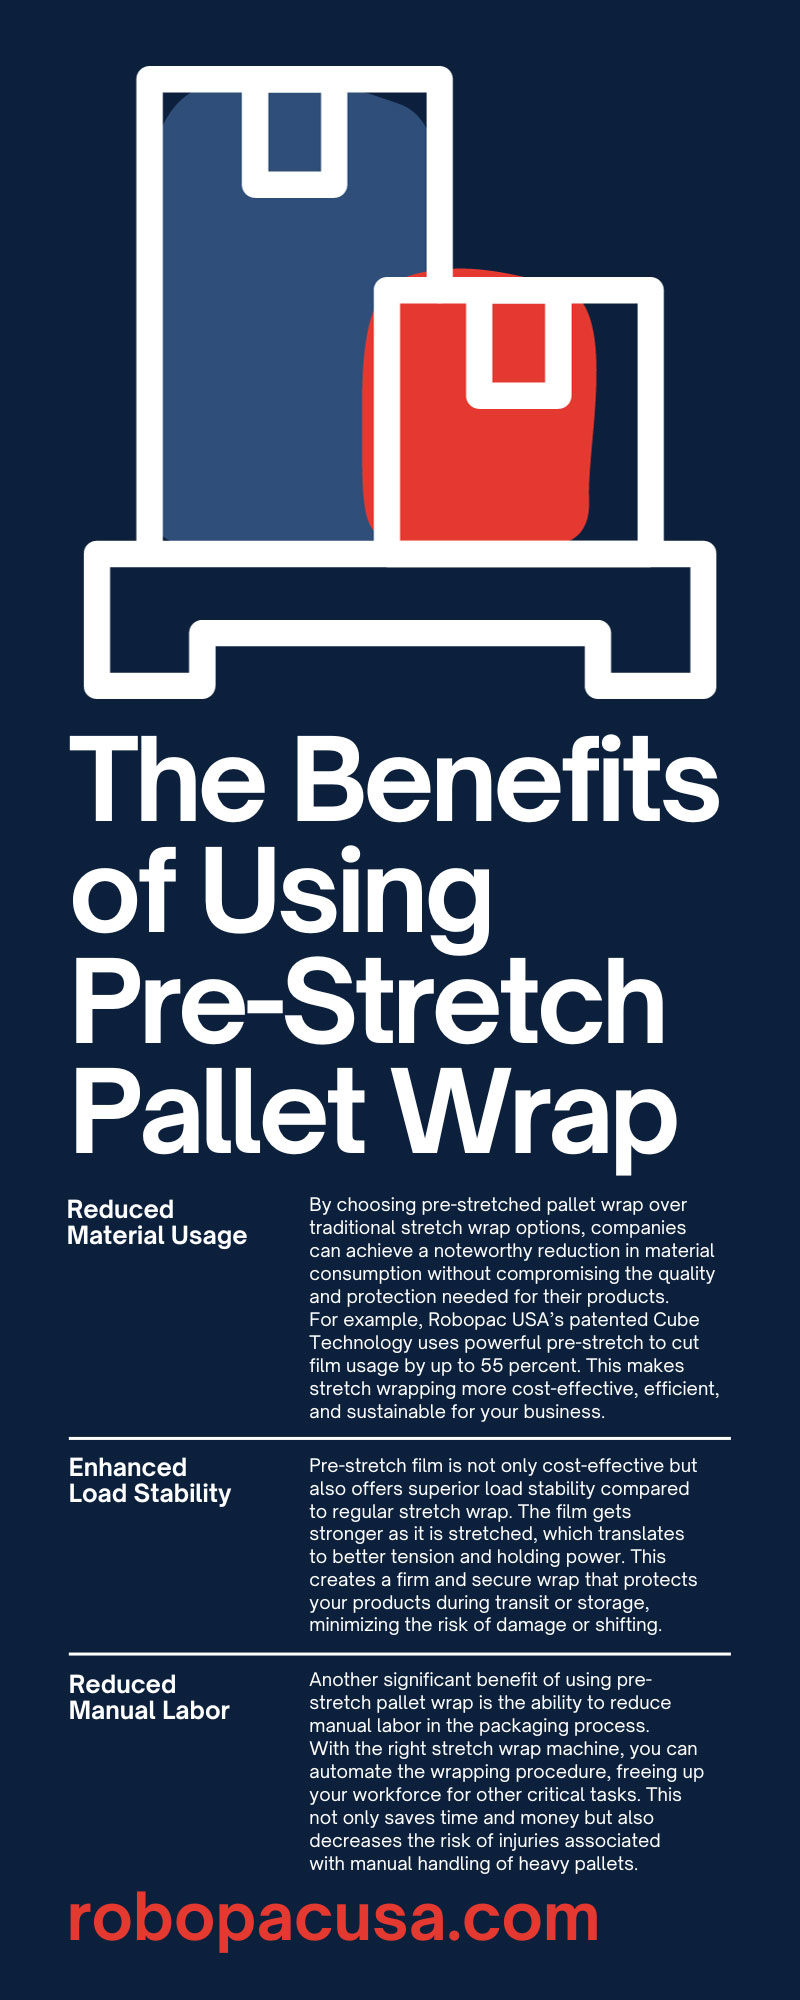 The Benefits of Using Pre-Stretch Pallet Wrap